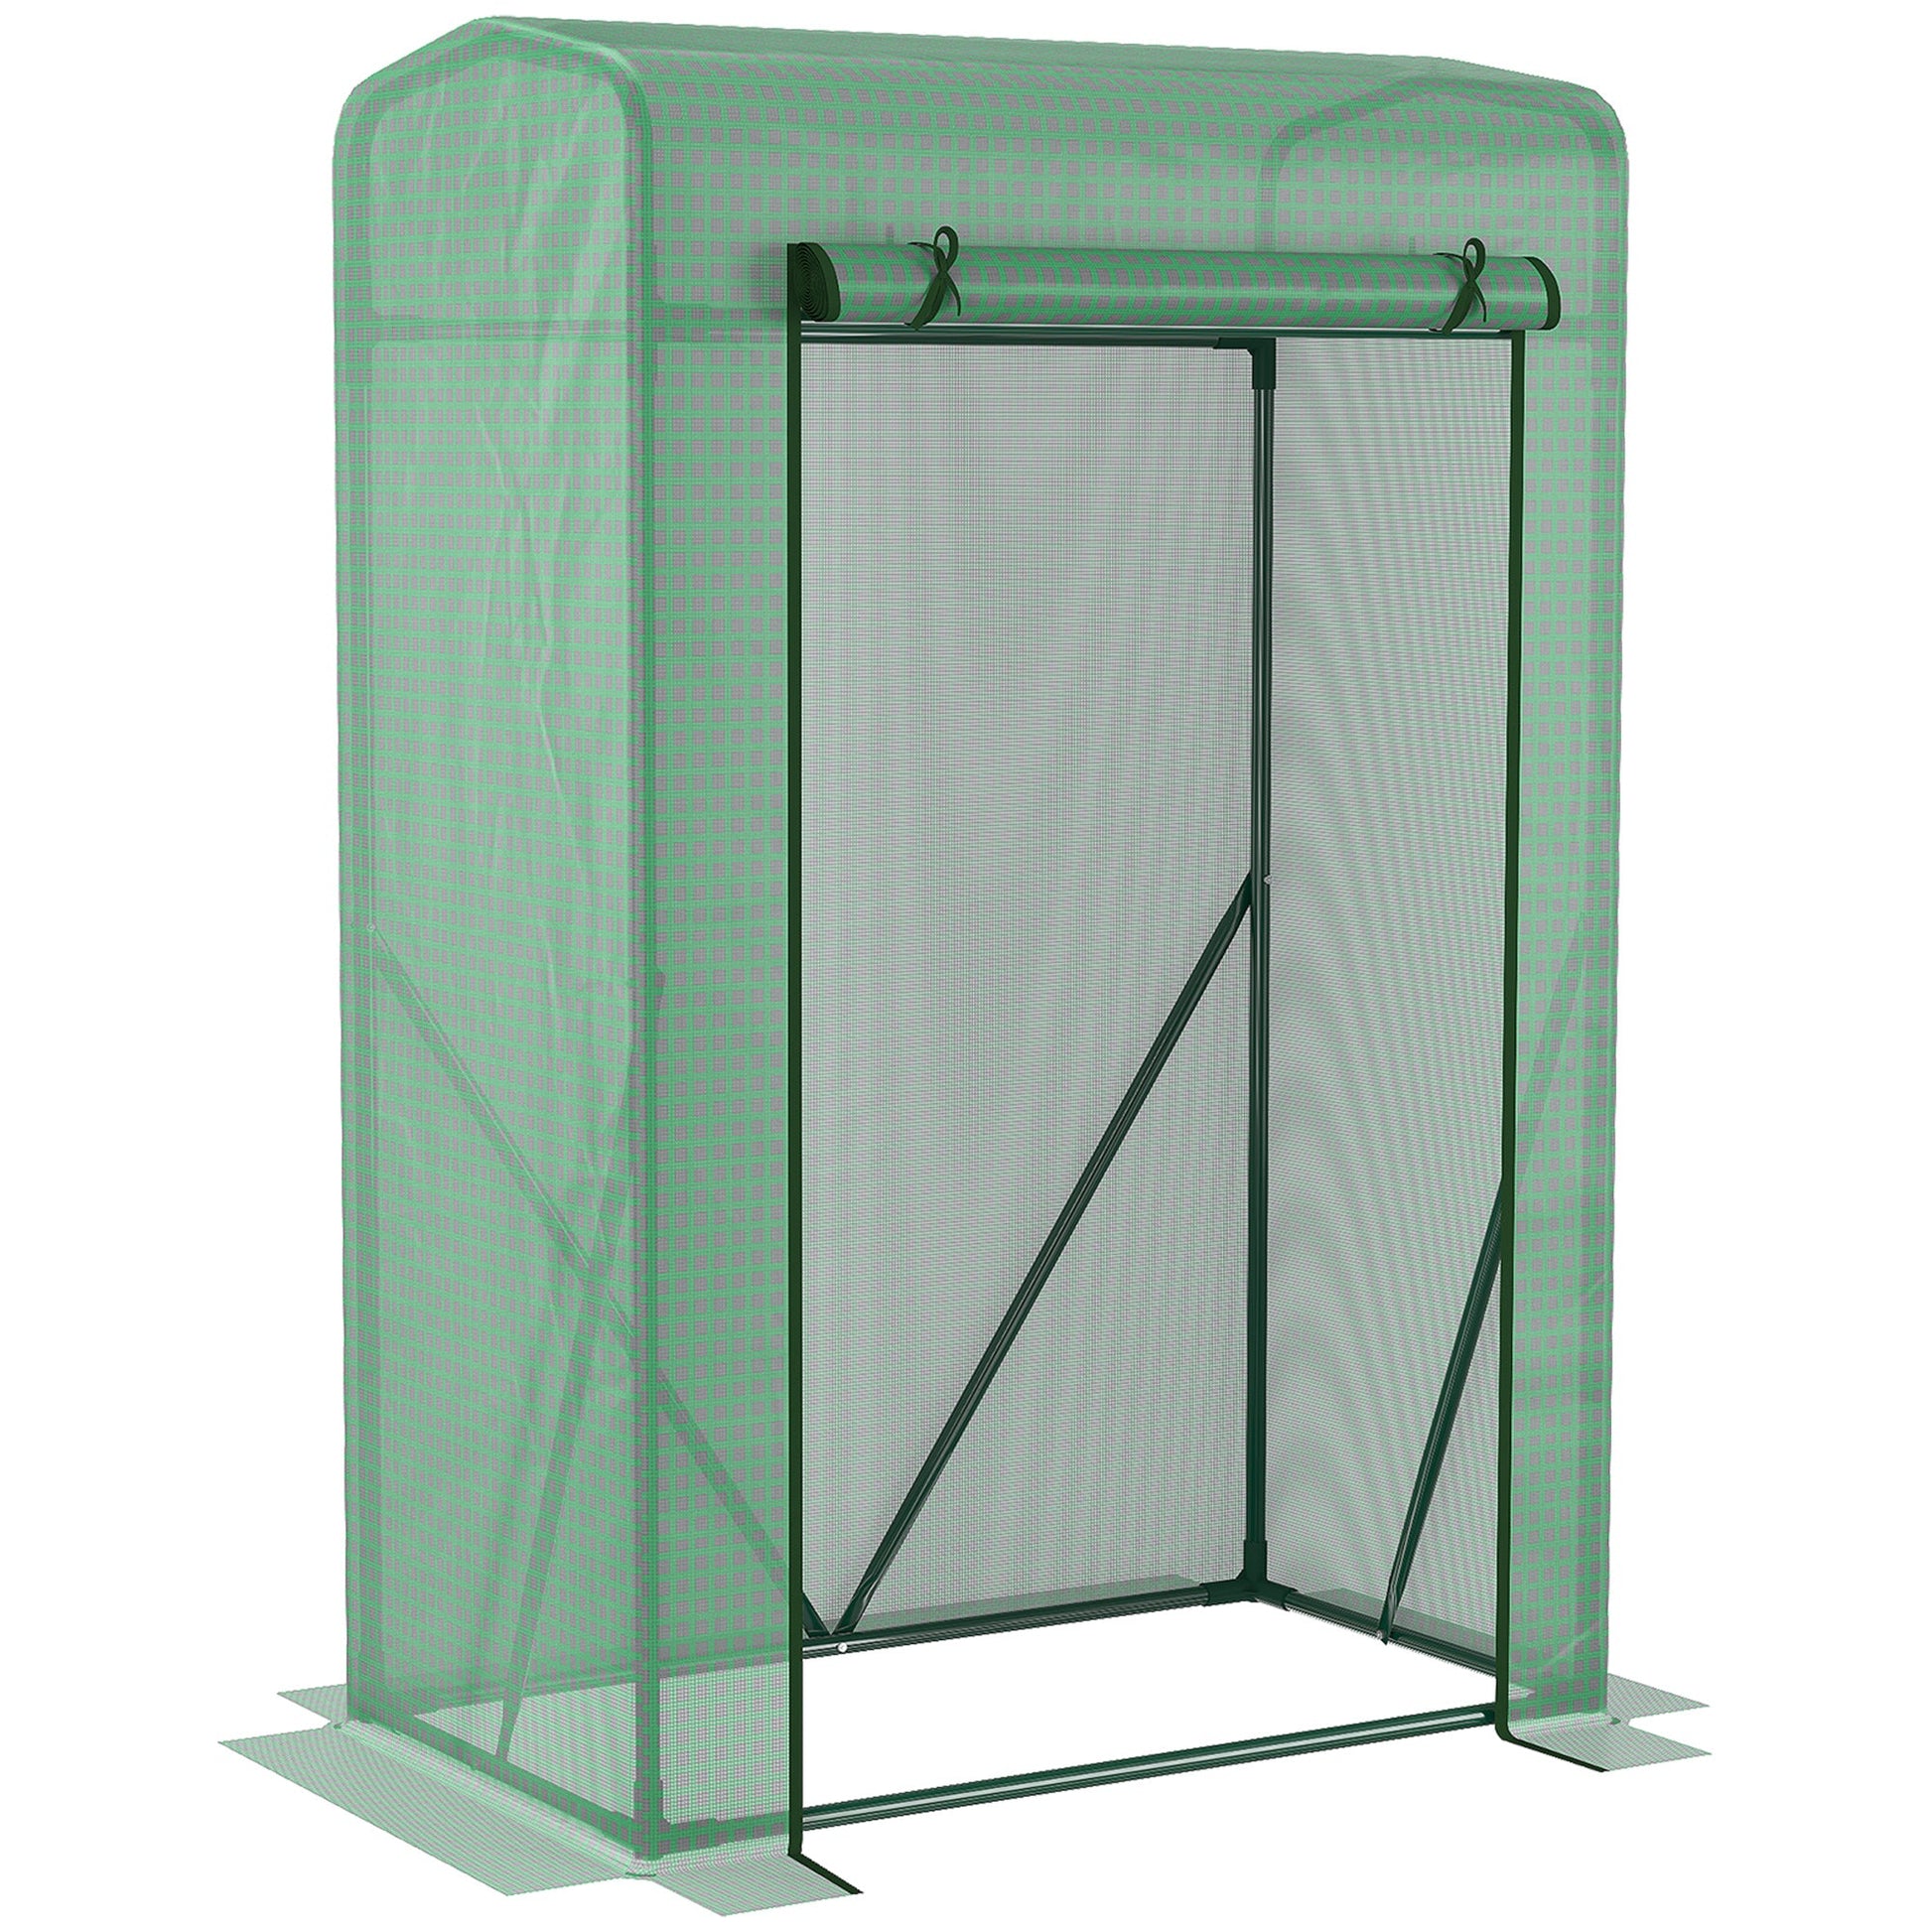 39" x 20" x 59" Outdoor Tomato Greenhouse with Zipper Roll-up Door, Mini Plant Growhouse Hot House with Steel Frame, PE Cover at Gallery Canada